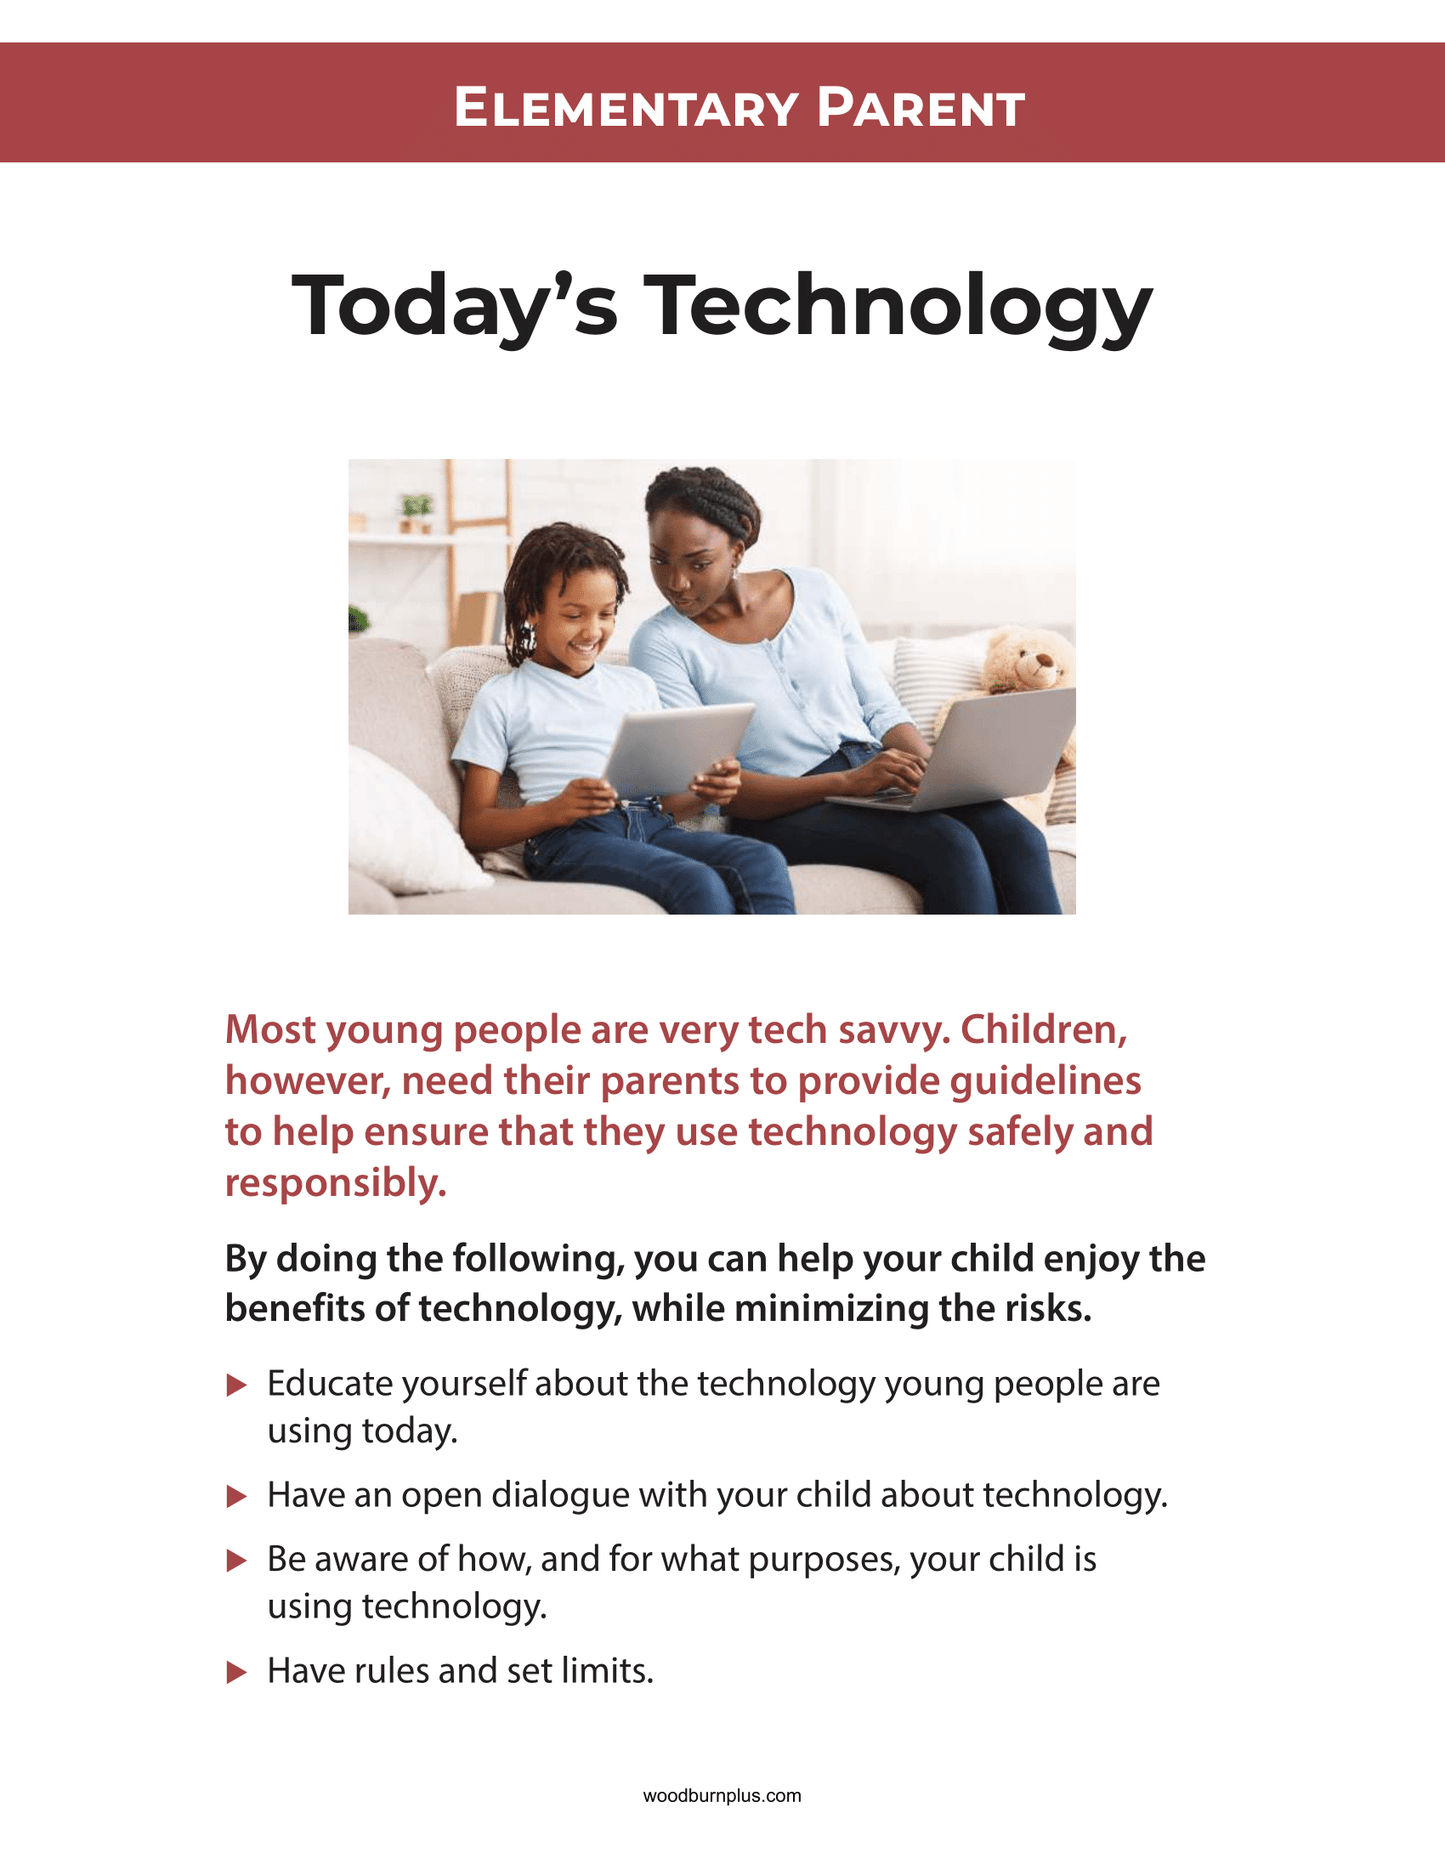 Elementary Parent - Today's Technology